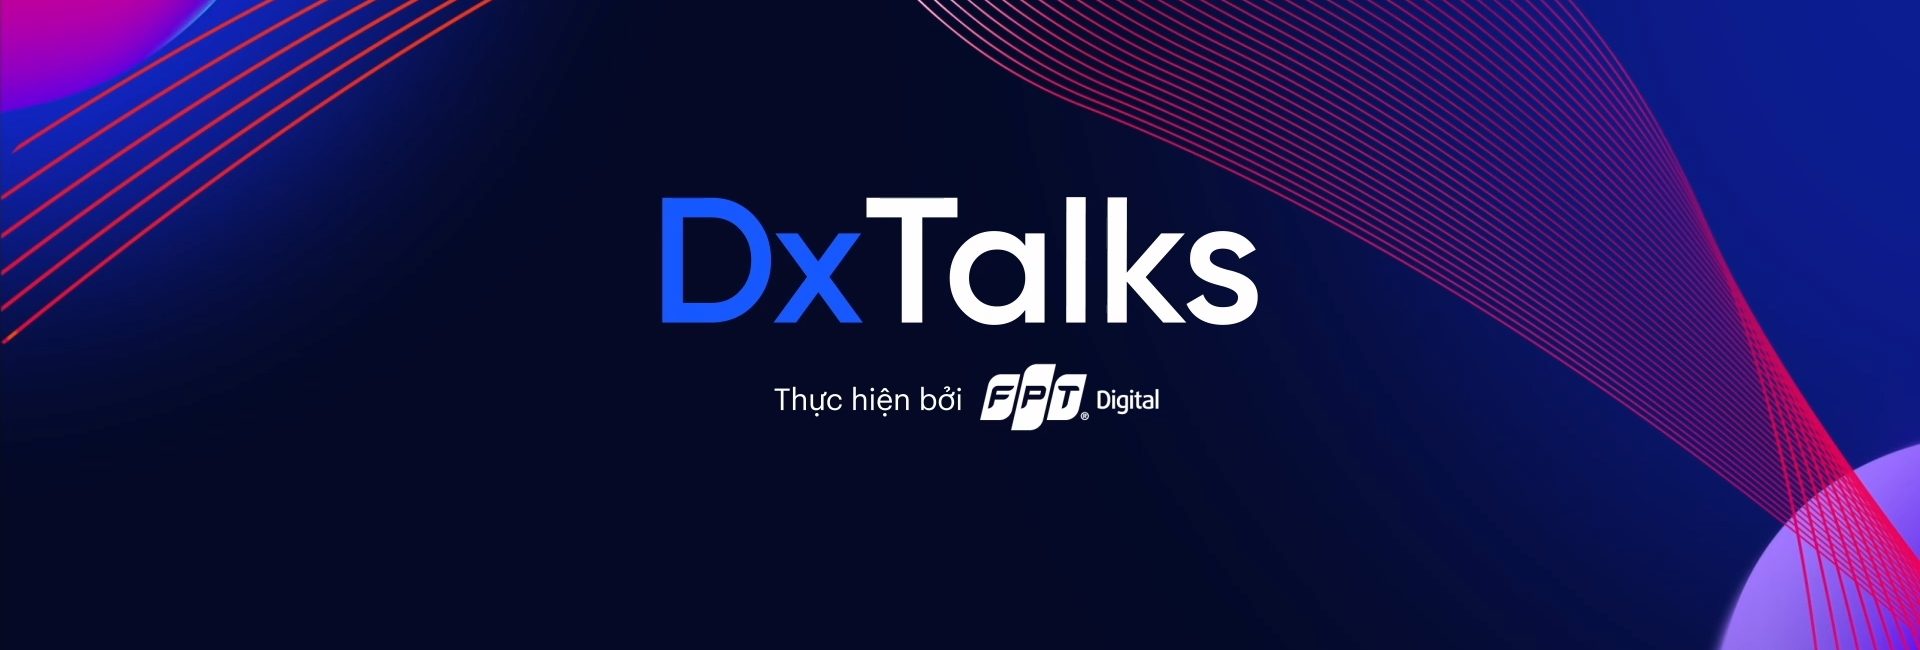 DxTalks EP01: “Assess Digital Maturity for Businesses” broadcasted officially